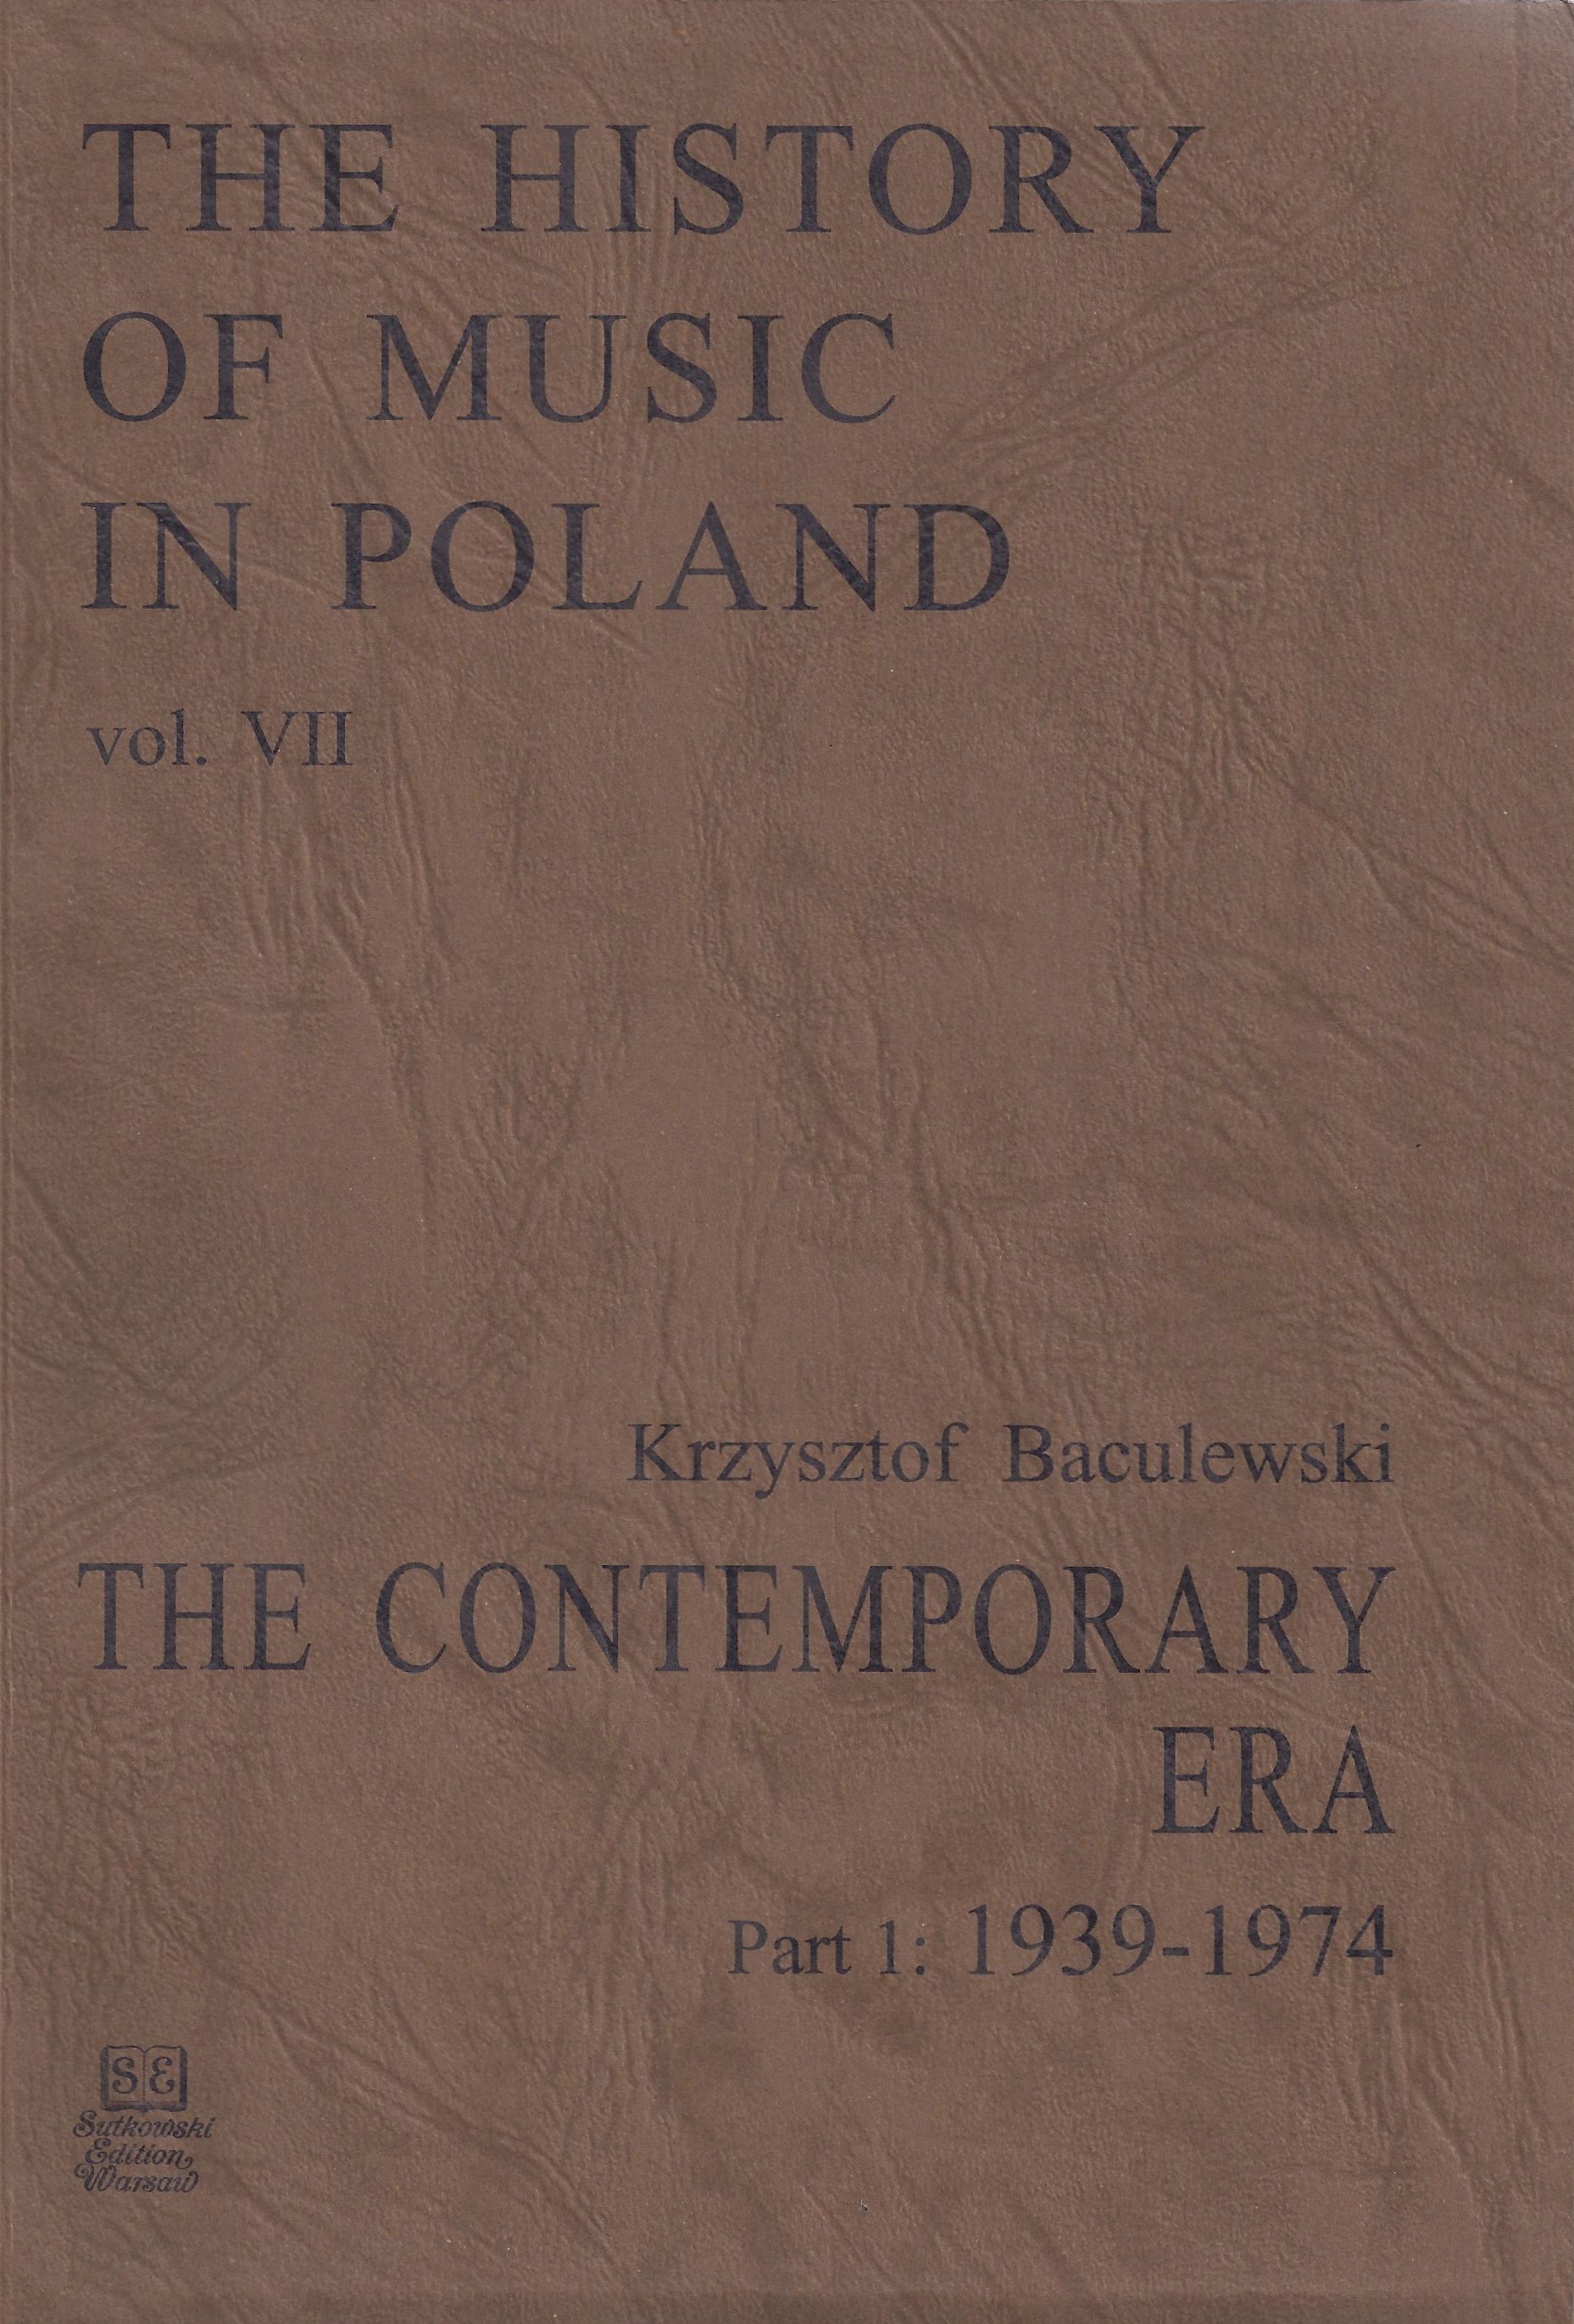 The History of Music in Poland vol VII Part 1 – The Contemporary Era (1939-1974)